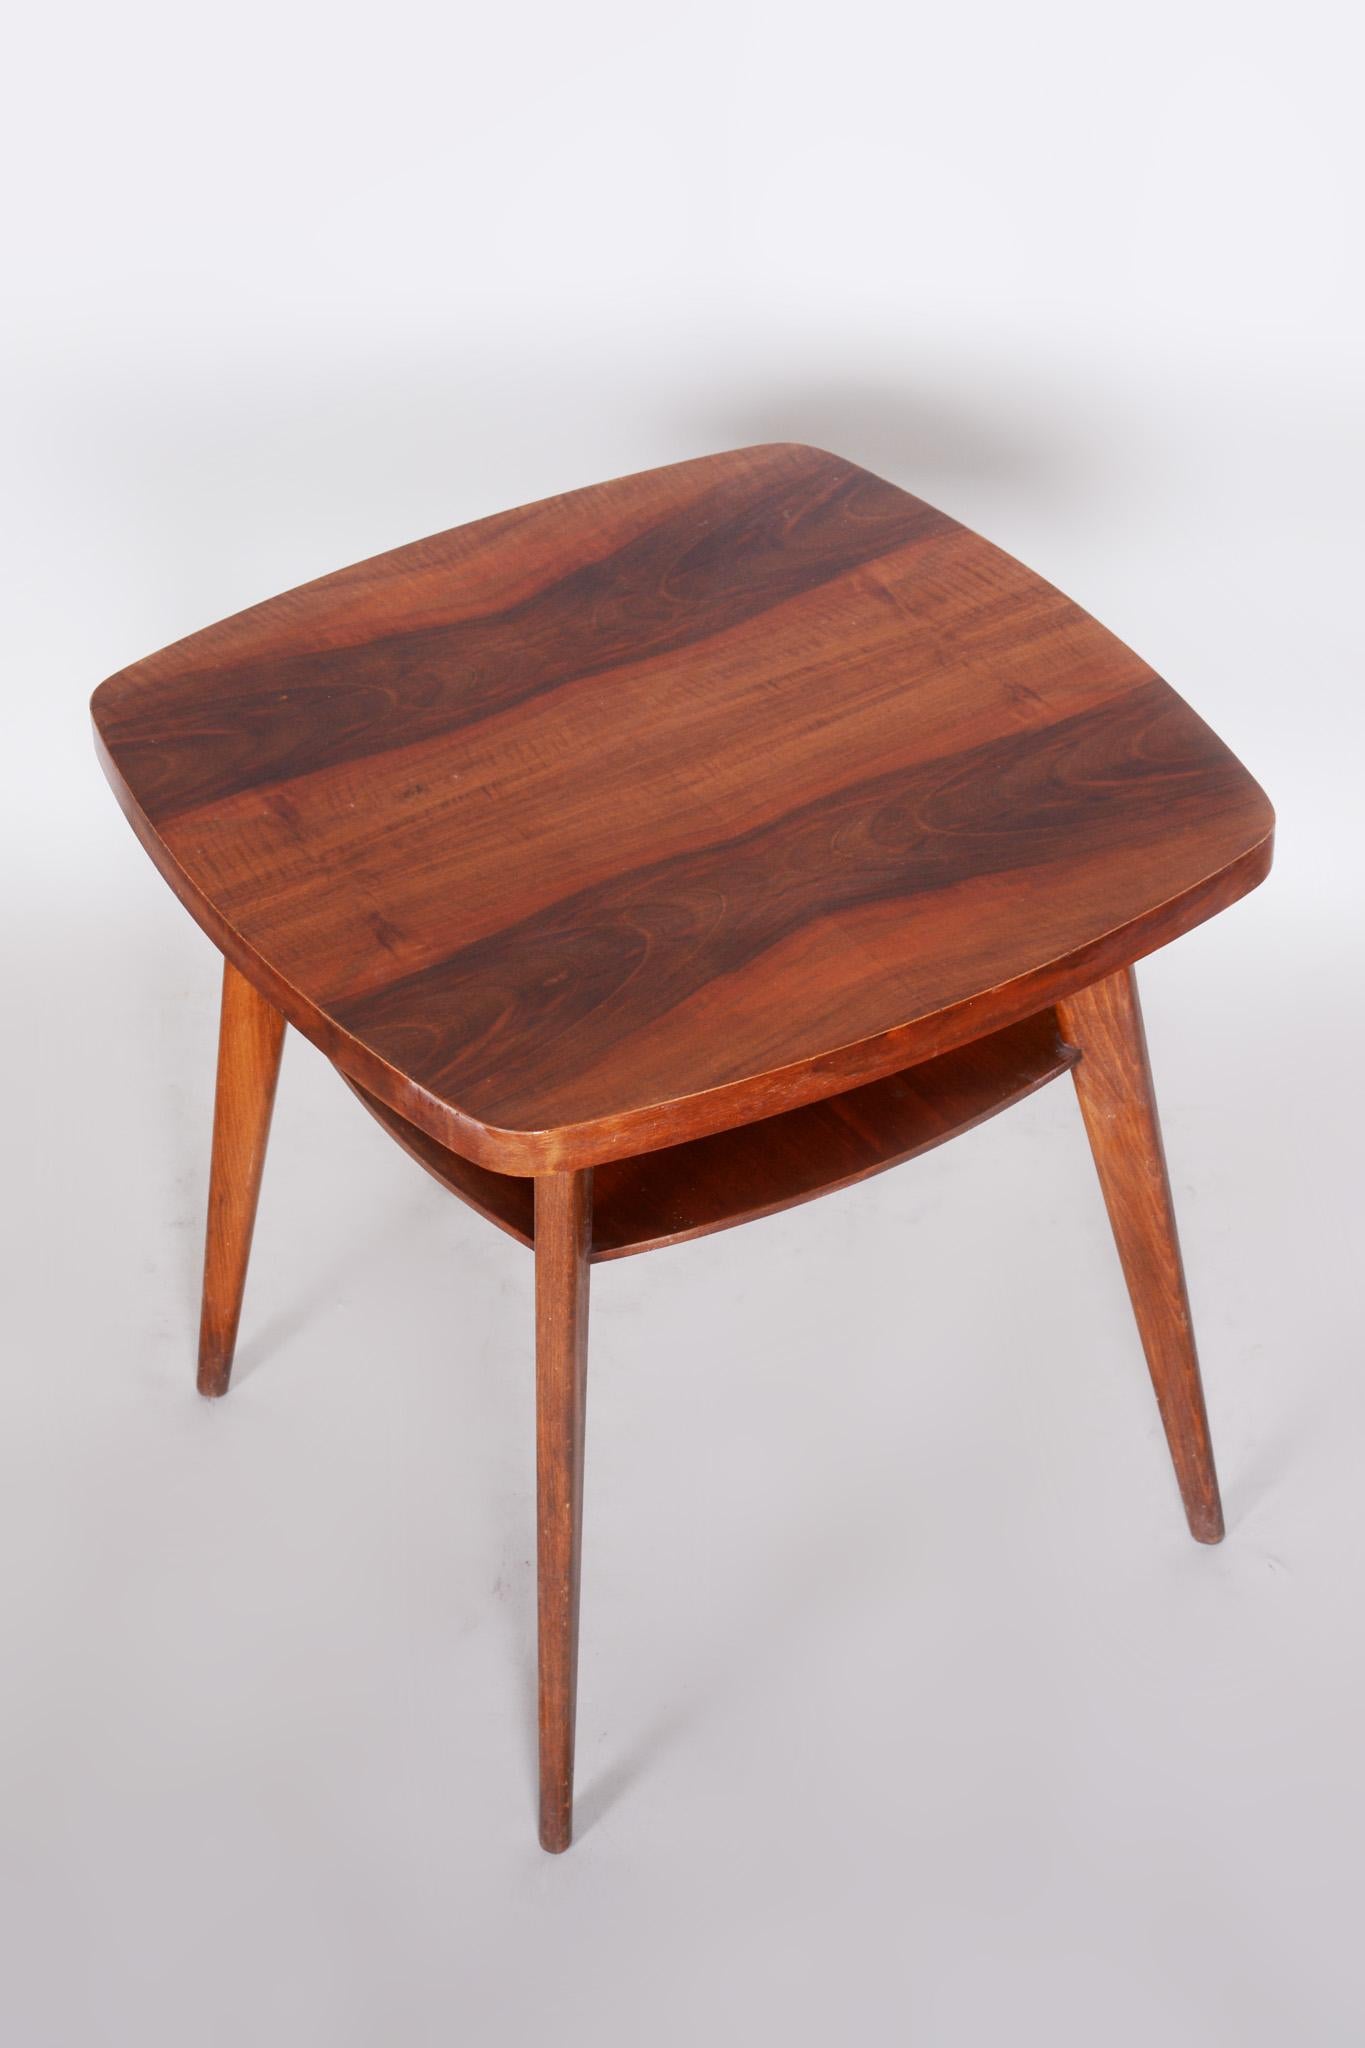 Wood Walnut Table, Czech Midcentury, Preserved Original Condition, 1950s For Sale